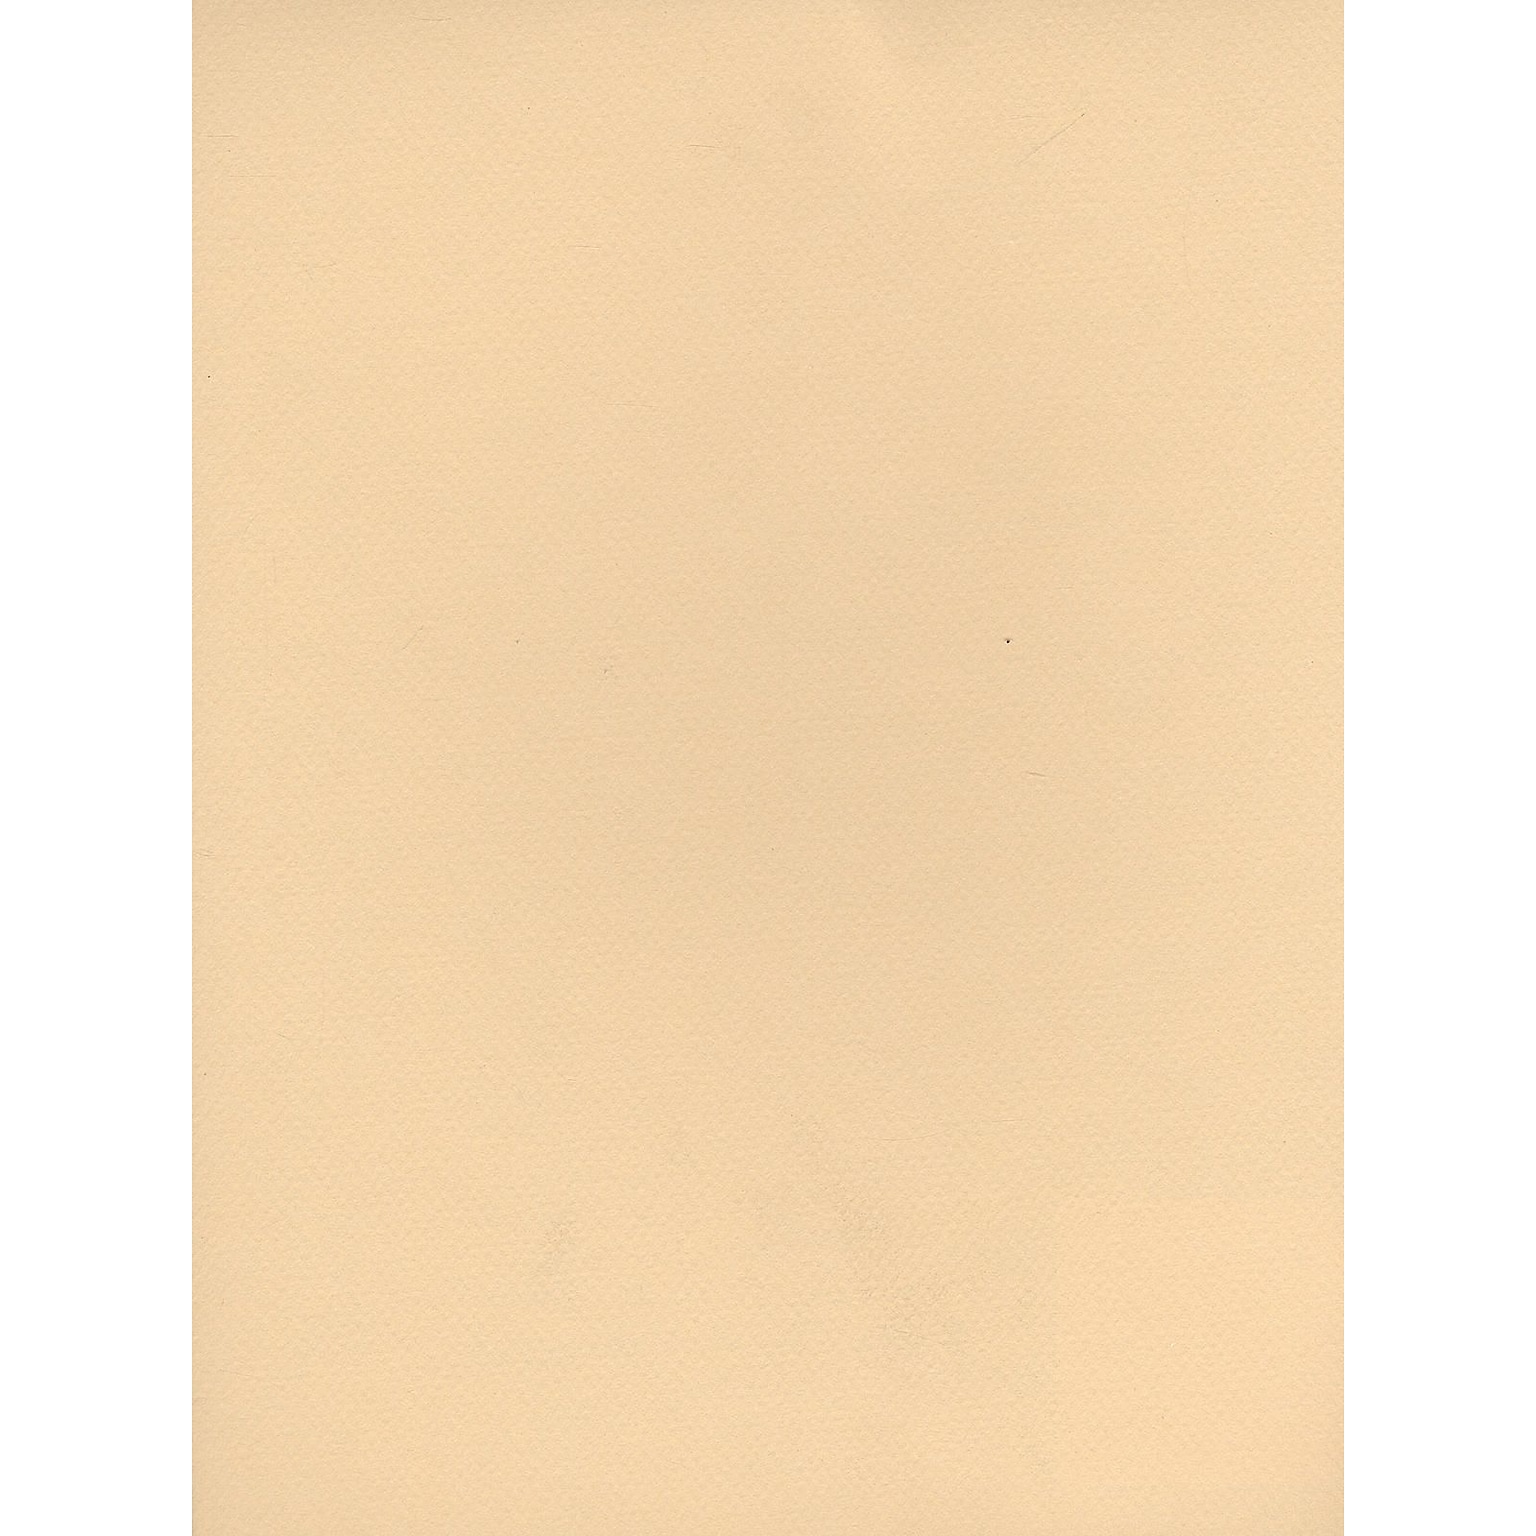 Canson Mi-Teintes Tinted Paper Cream 8.5 In. X 11 In. [Pack Of 25]